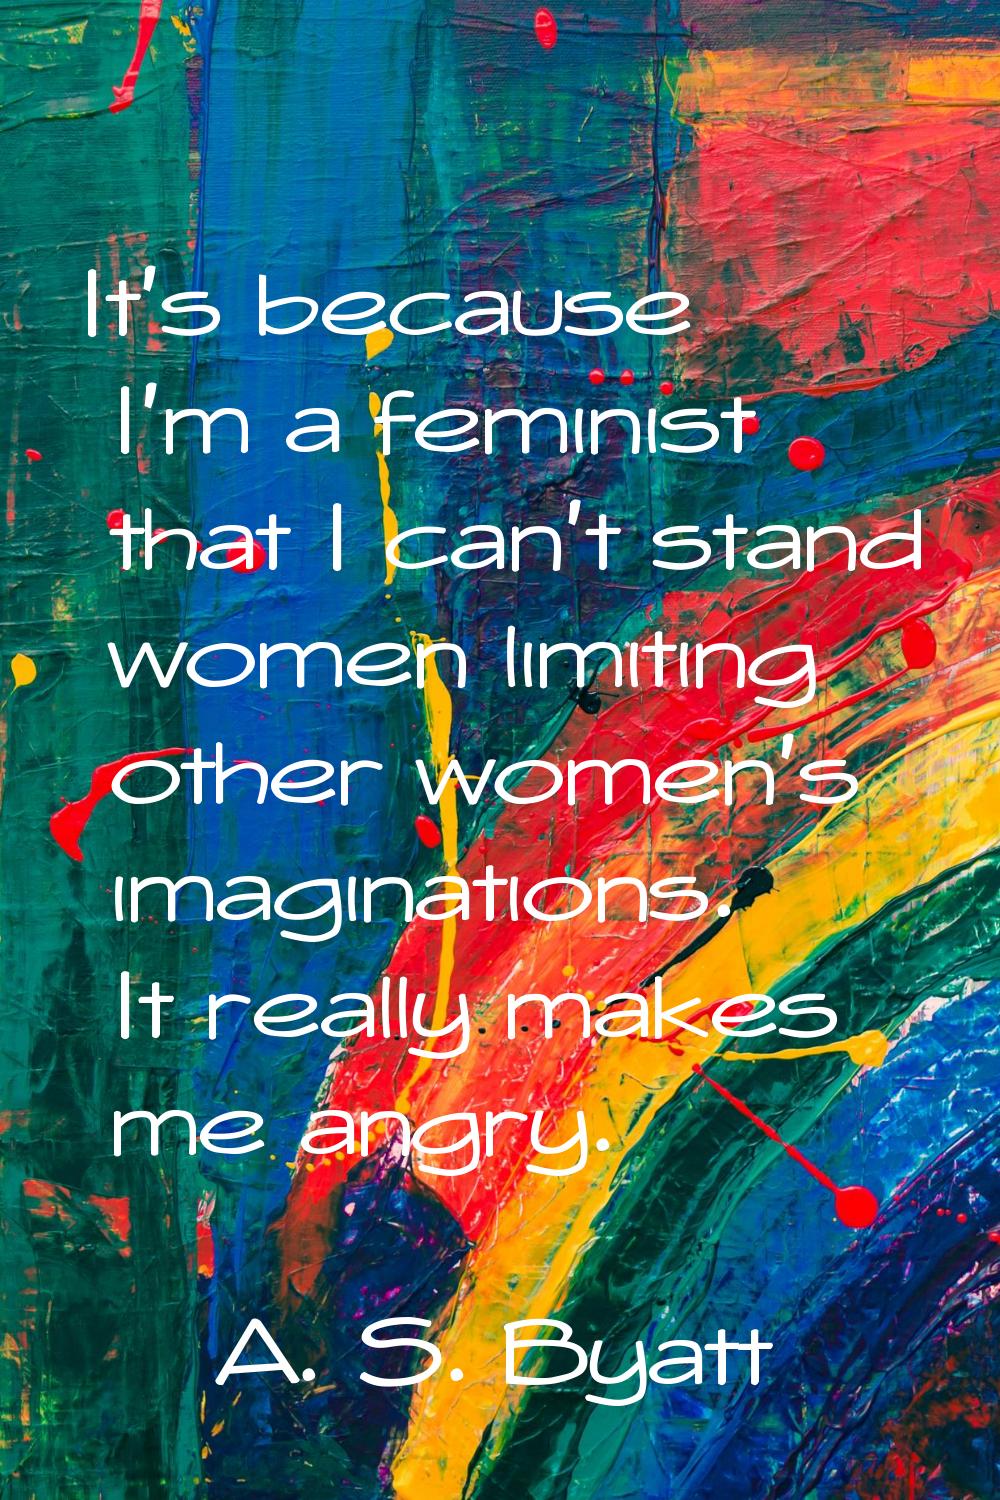 It's because I'm a feminist that I can't stand women limiting other women's imaginations. It really